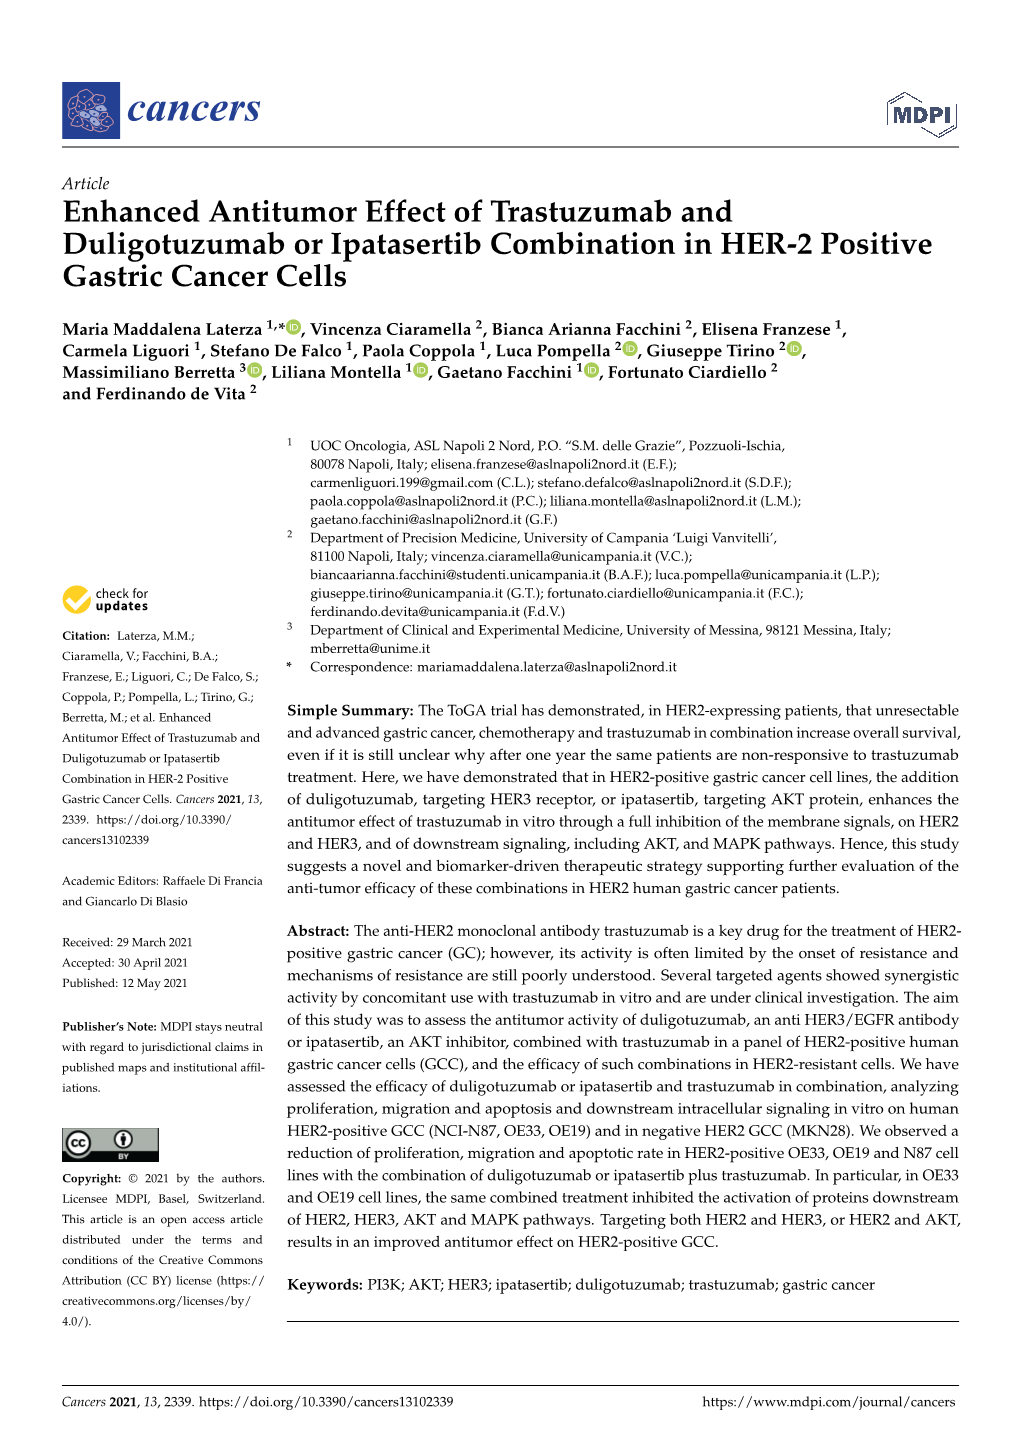 Enhanced Antitumor Effect of Trastuzumab and Duligotuzumab Or Ipatasertib Combination in HER-2 Positive Gastric Cancer Cells